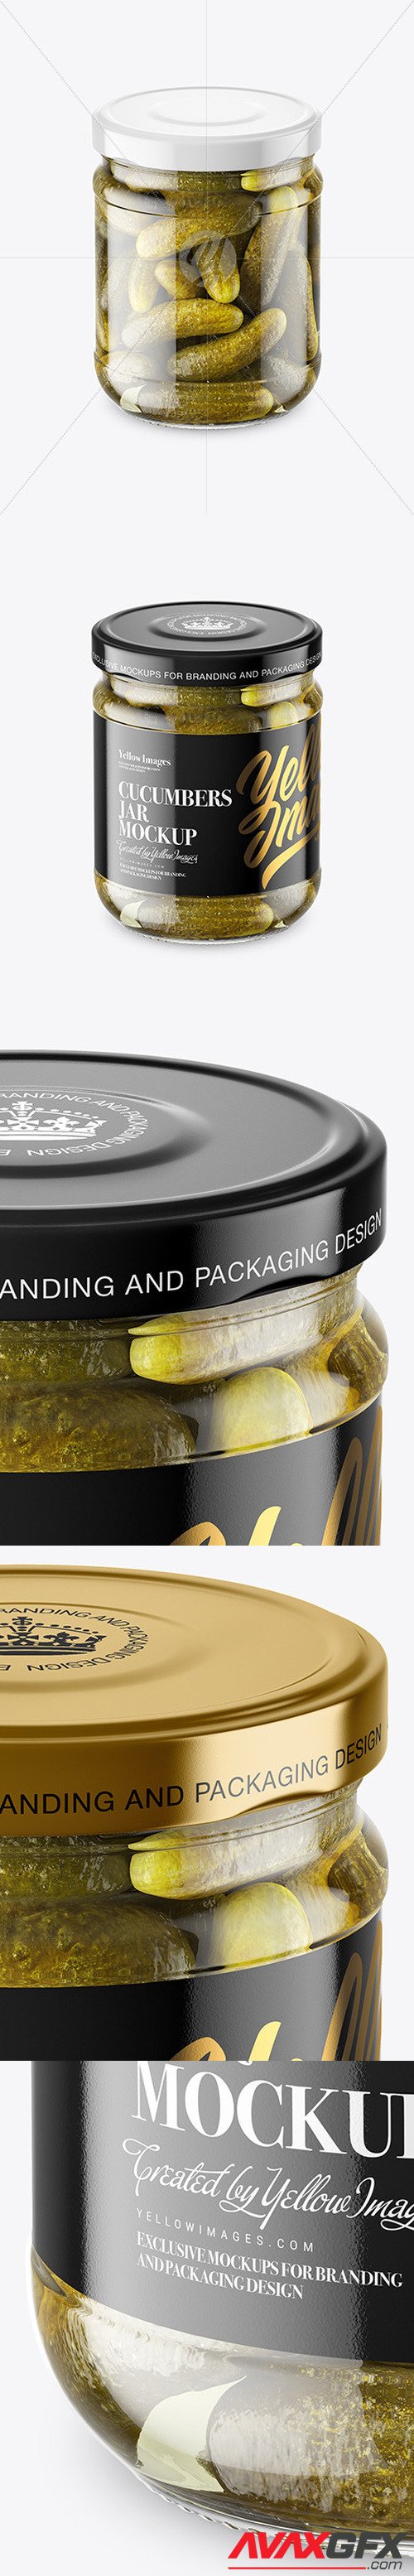 Clear Glass Jar with Pickled Cucumbers Mockup 46558 [TIF]